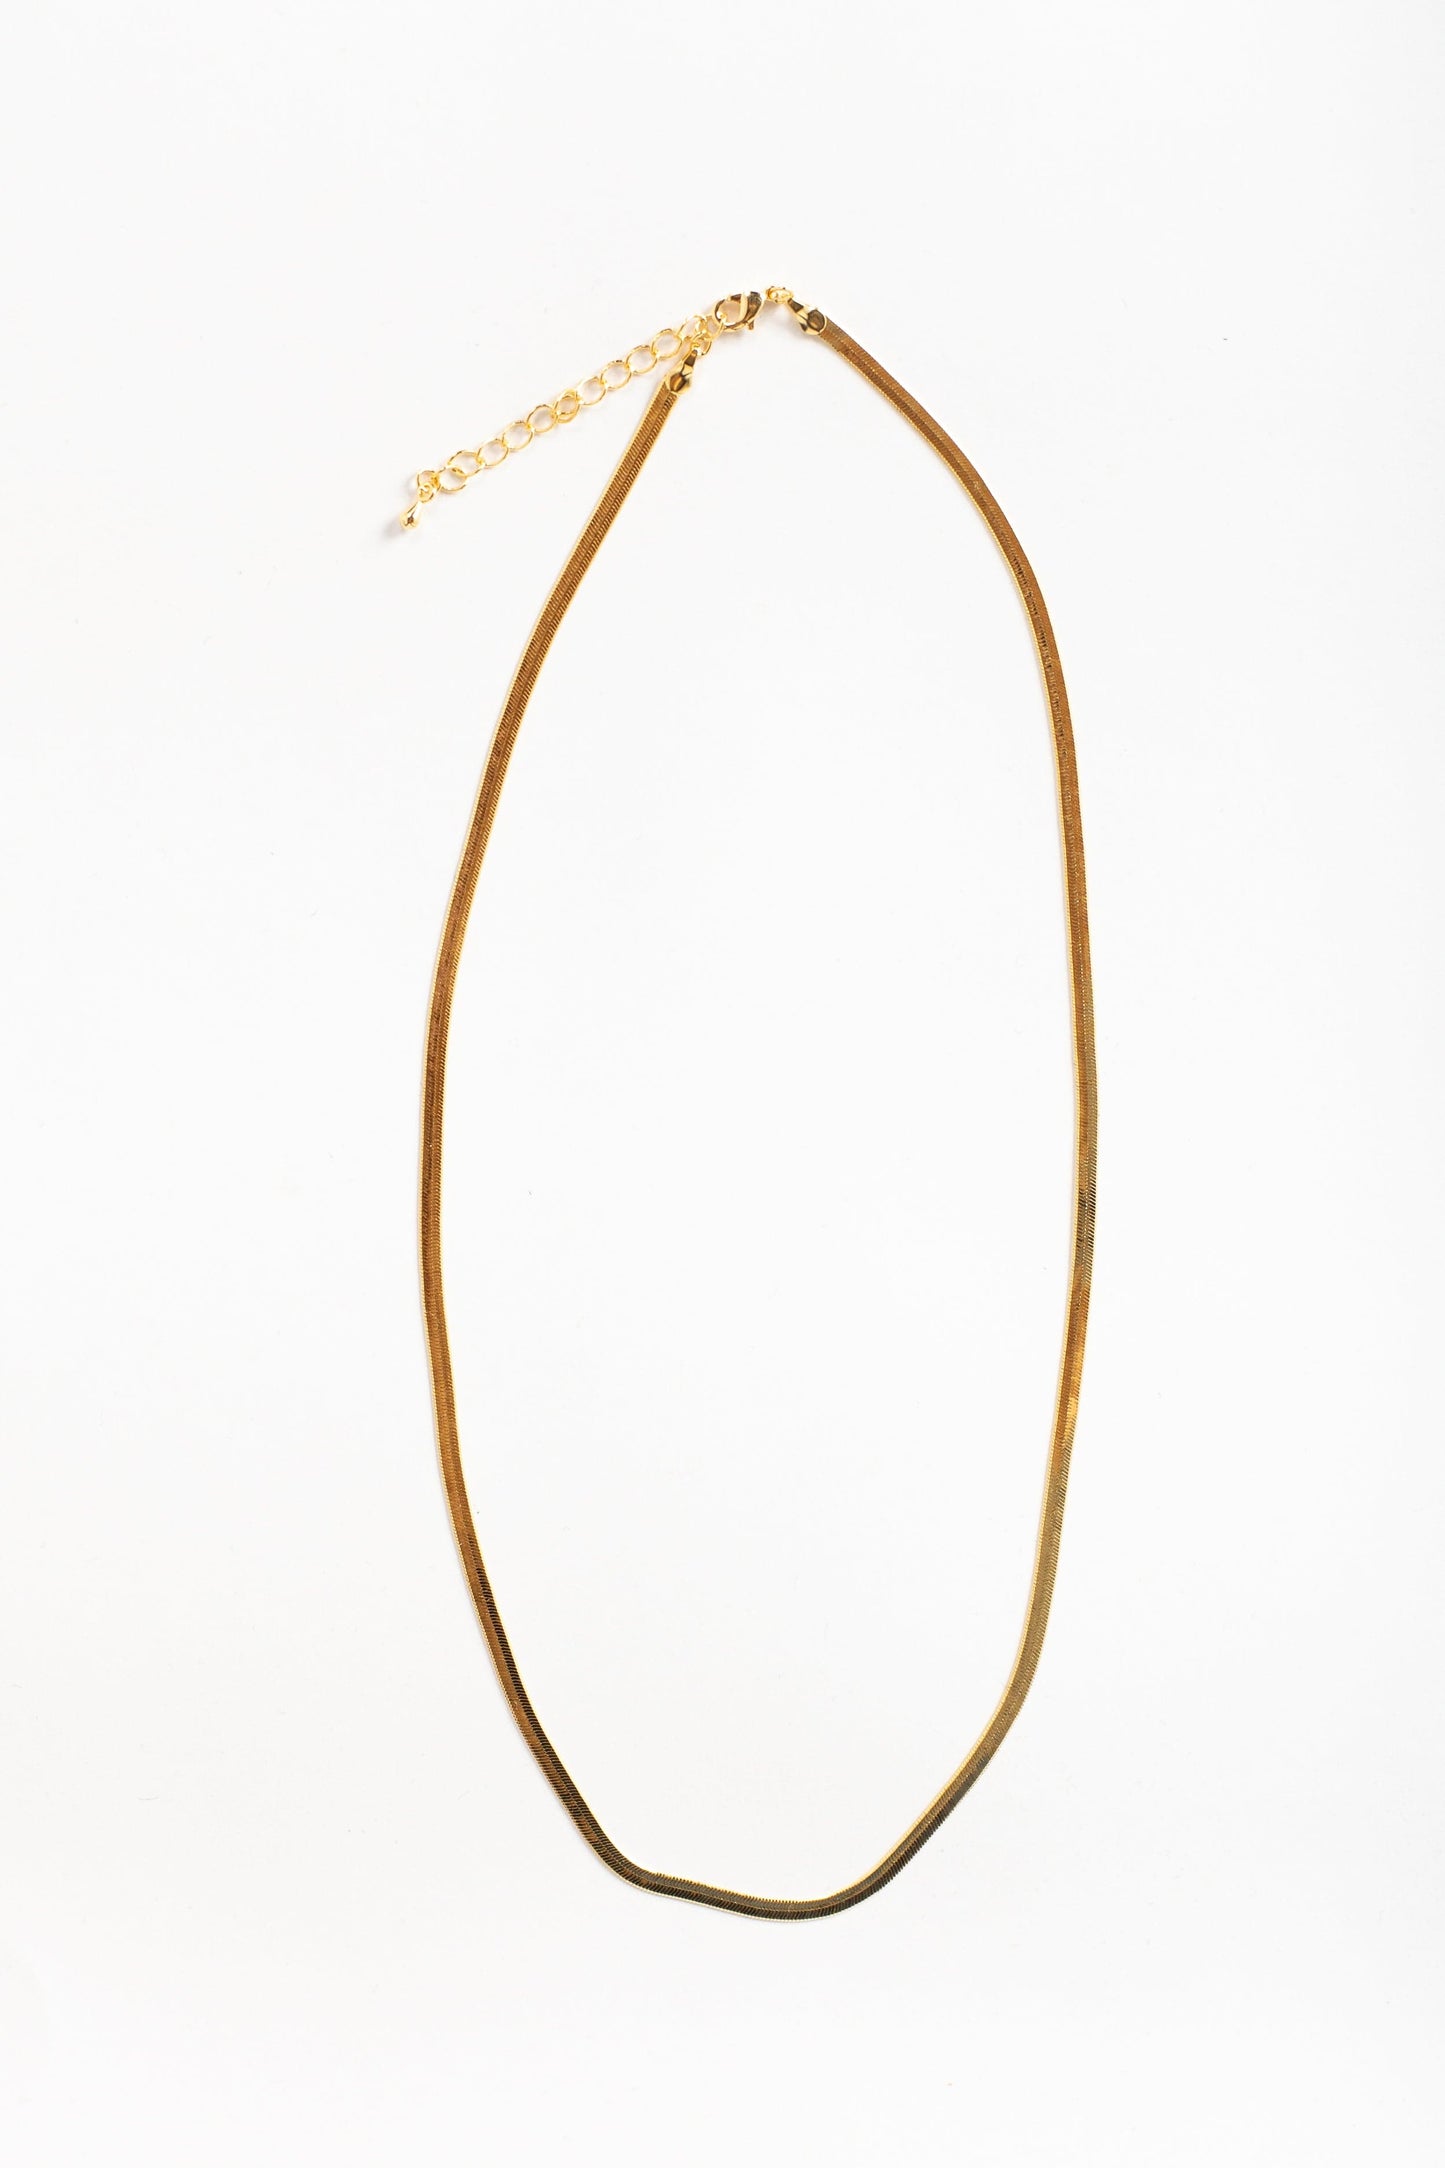 Herringbone Chain WOMEN'S NECKLACE Cove Gold Necklace 16"